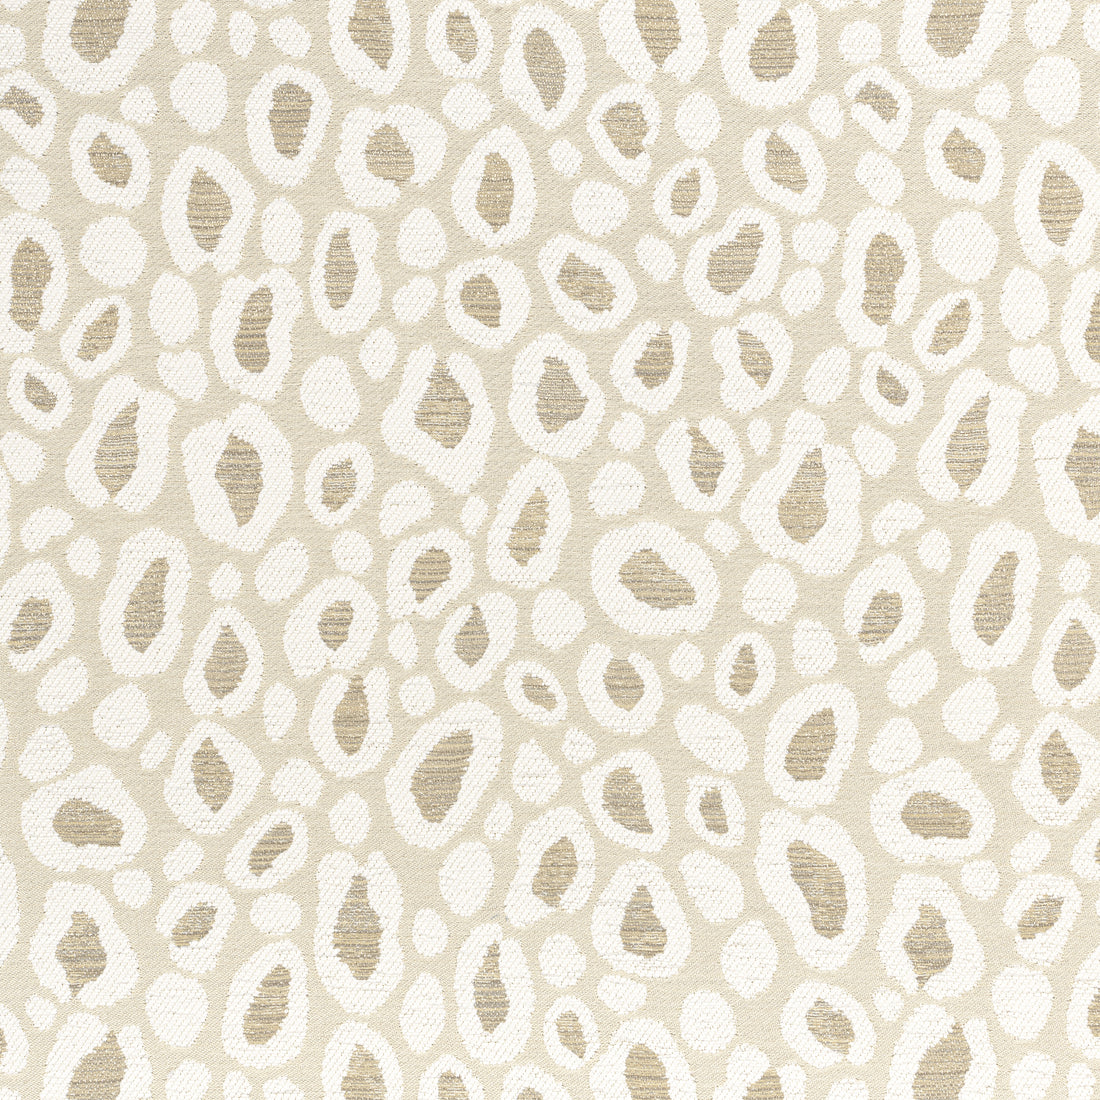 Kenzo fabric in sahara color - pattern number W8826 - by Thibaut in the Haven collection